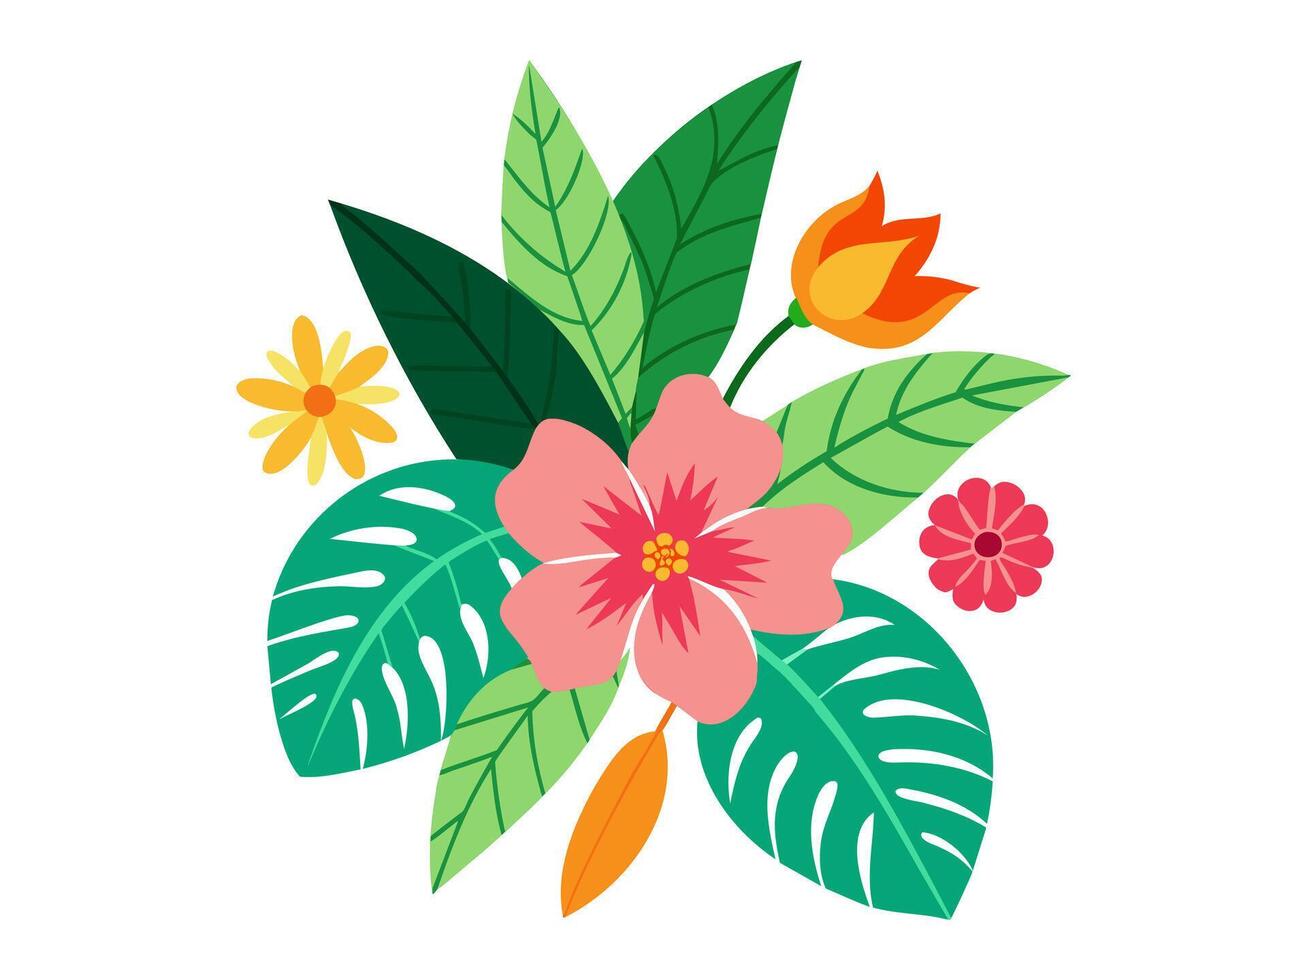 Tropical flowers and leaves illustration. Exotic flora art with vibrant colors. Concept of tropical nature, botany, exotic plants, and summer vibes. Isolated on white surface vector